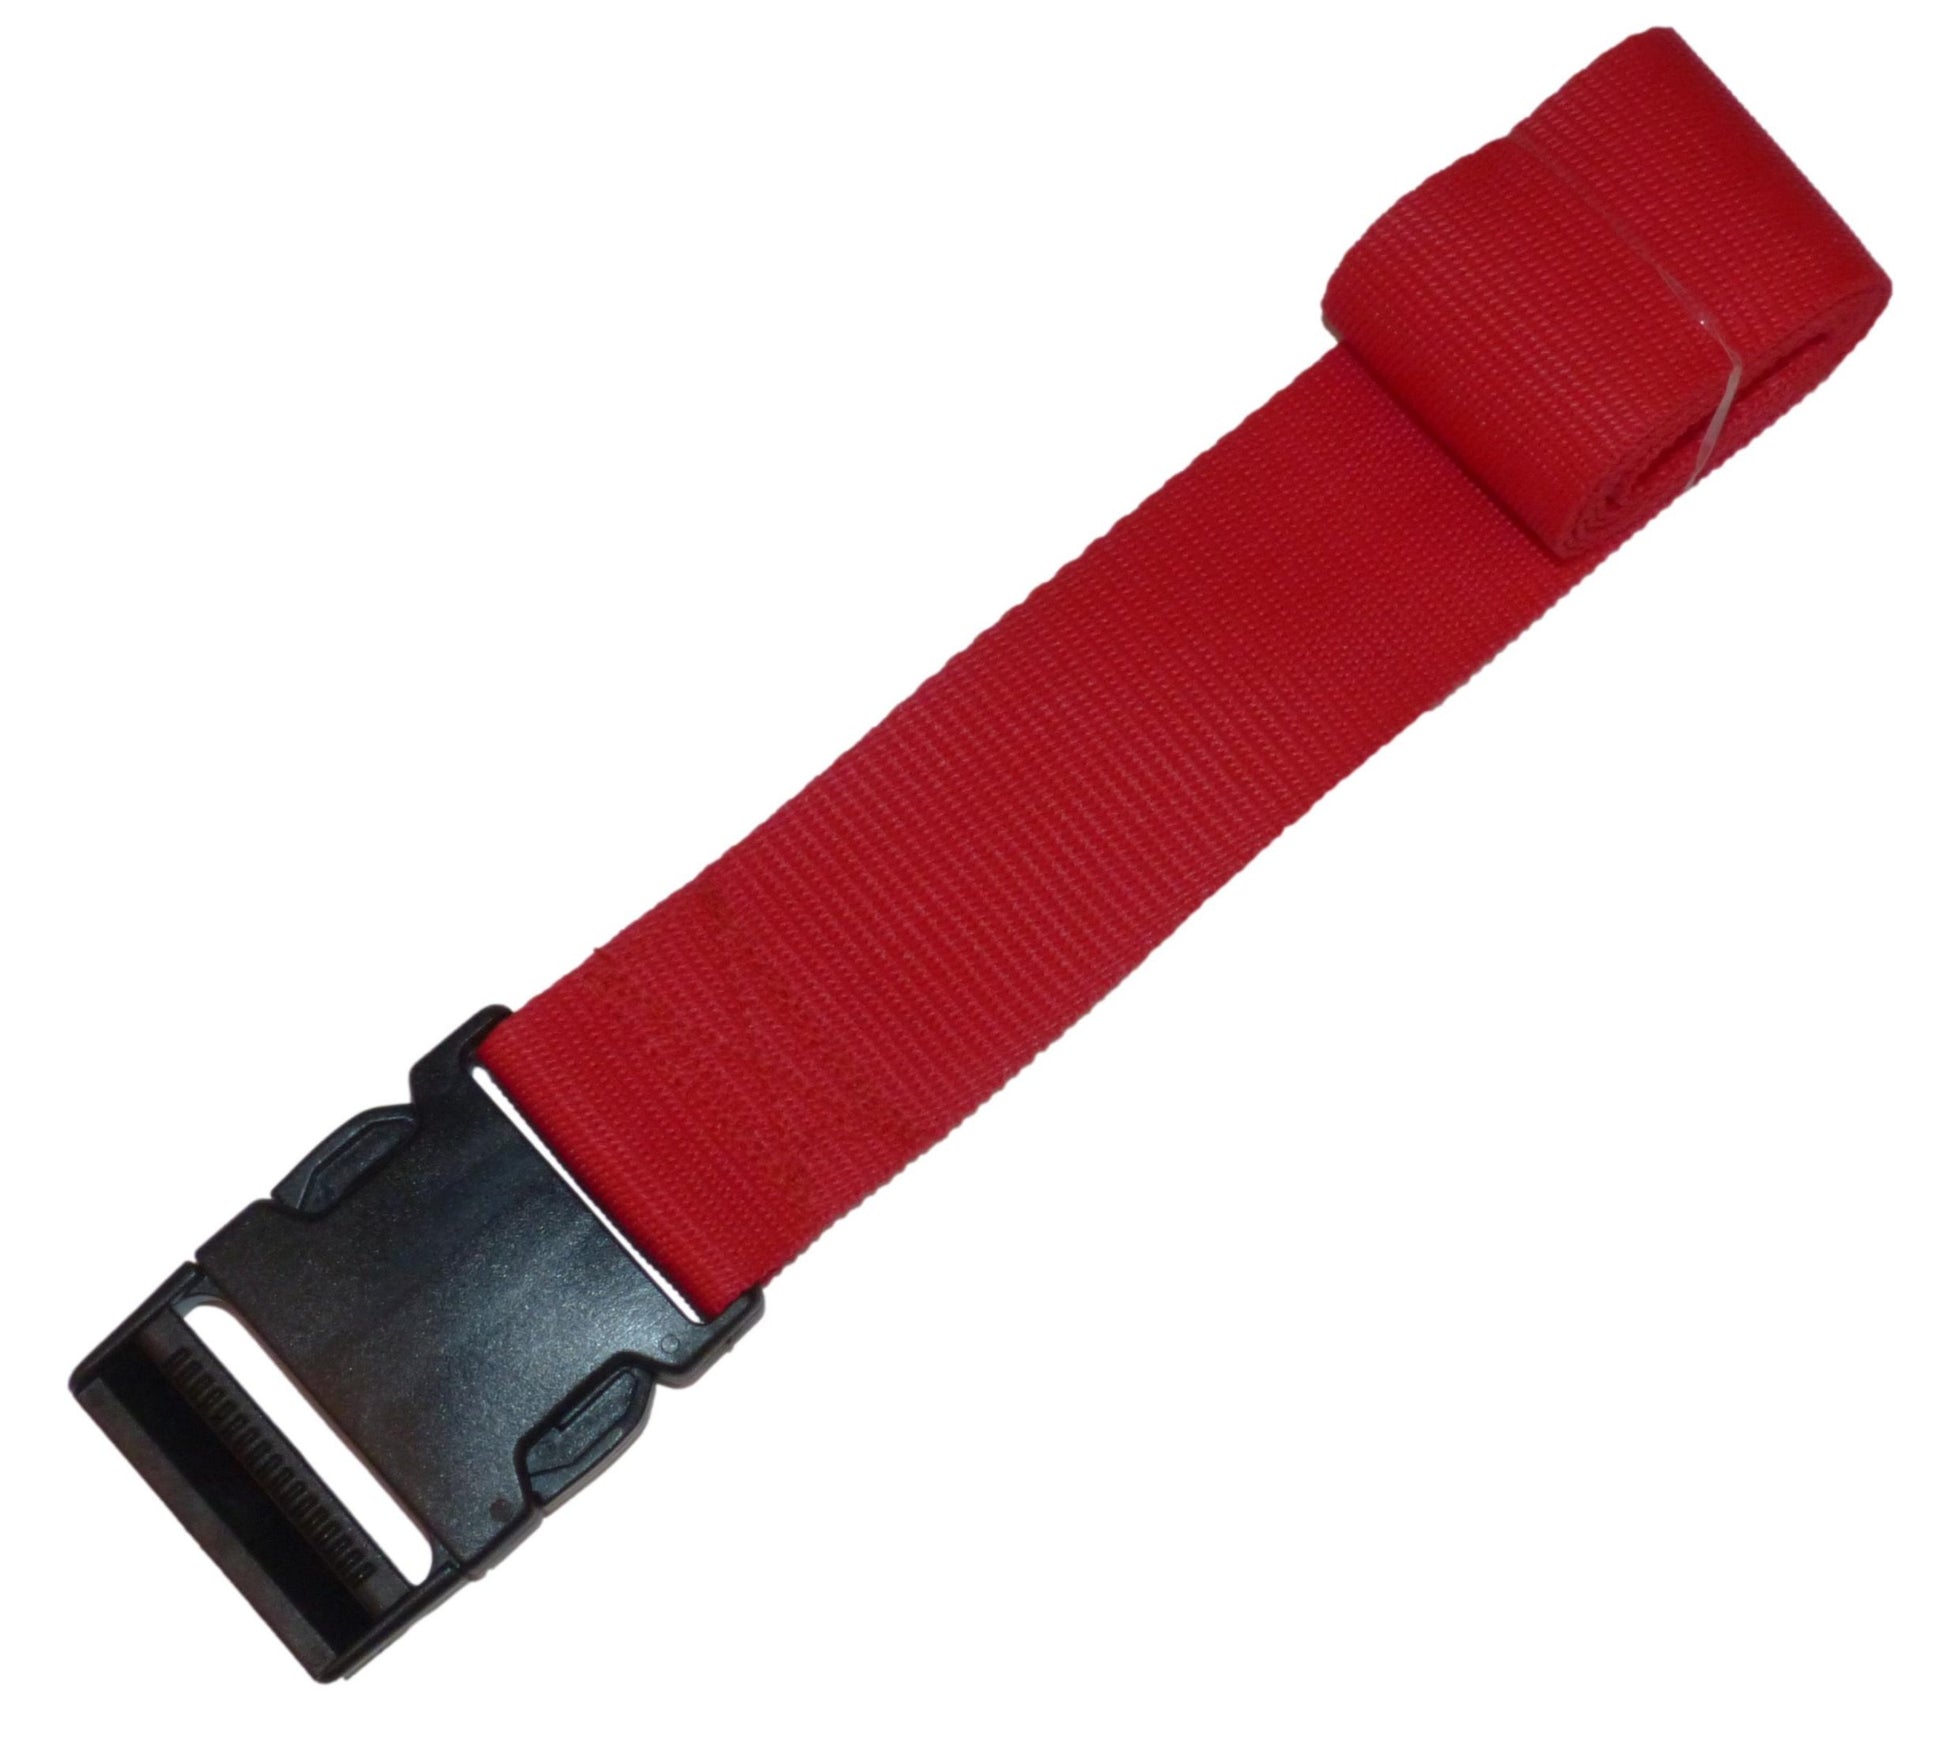 Benristraps 50mm Webbing Strap with Quick Release Buckle in red